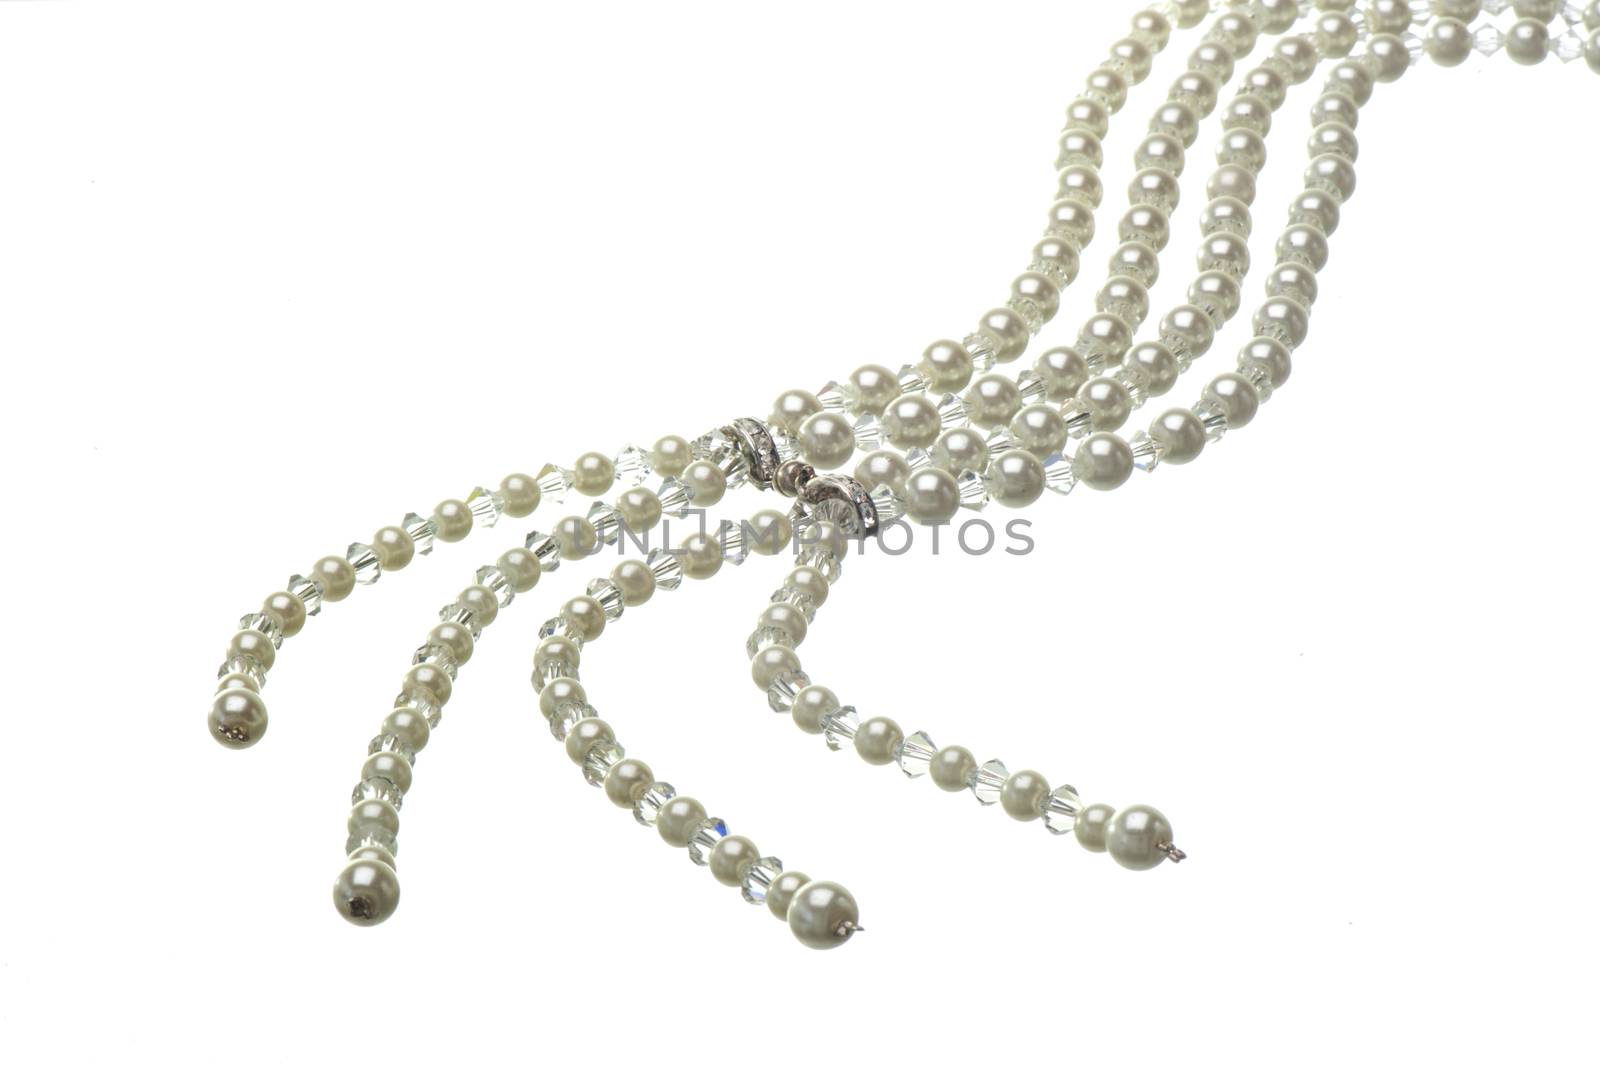 4-wire pearl necklace  by carla720